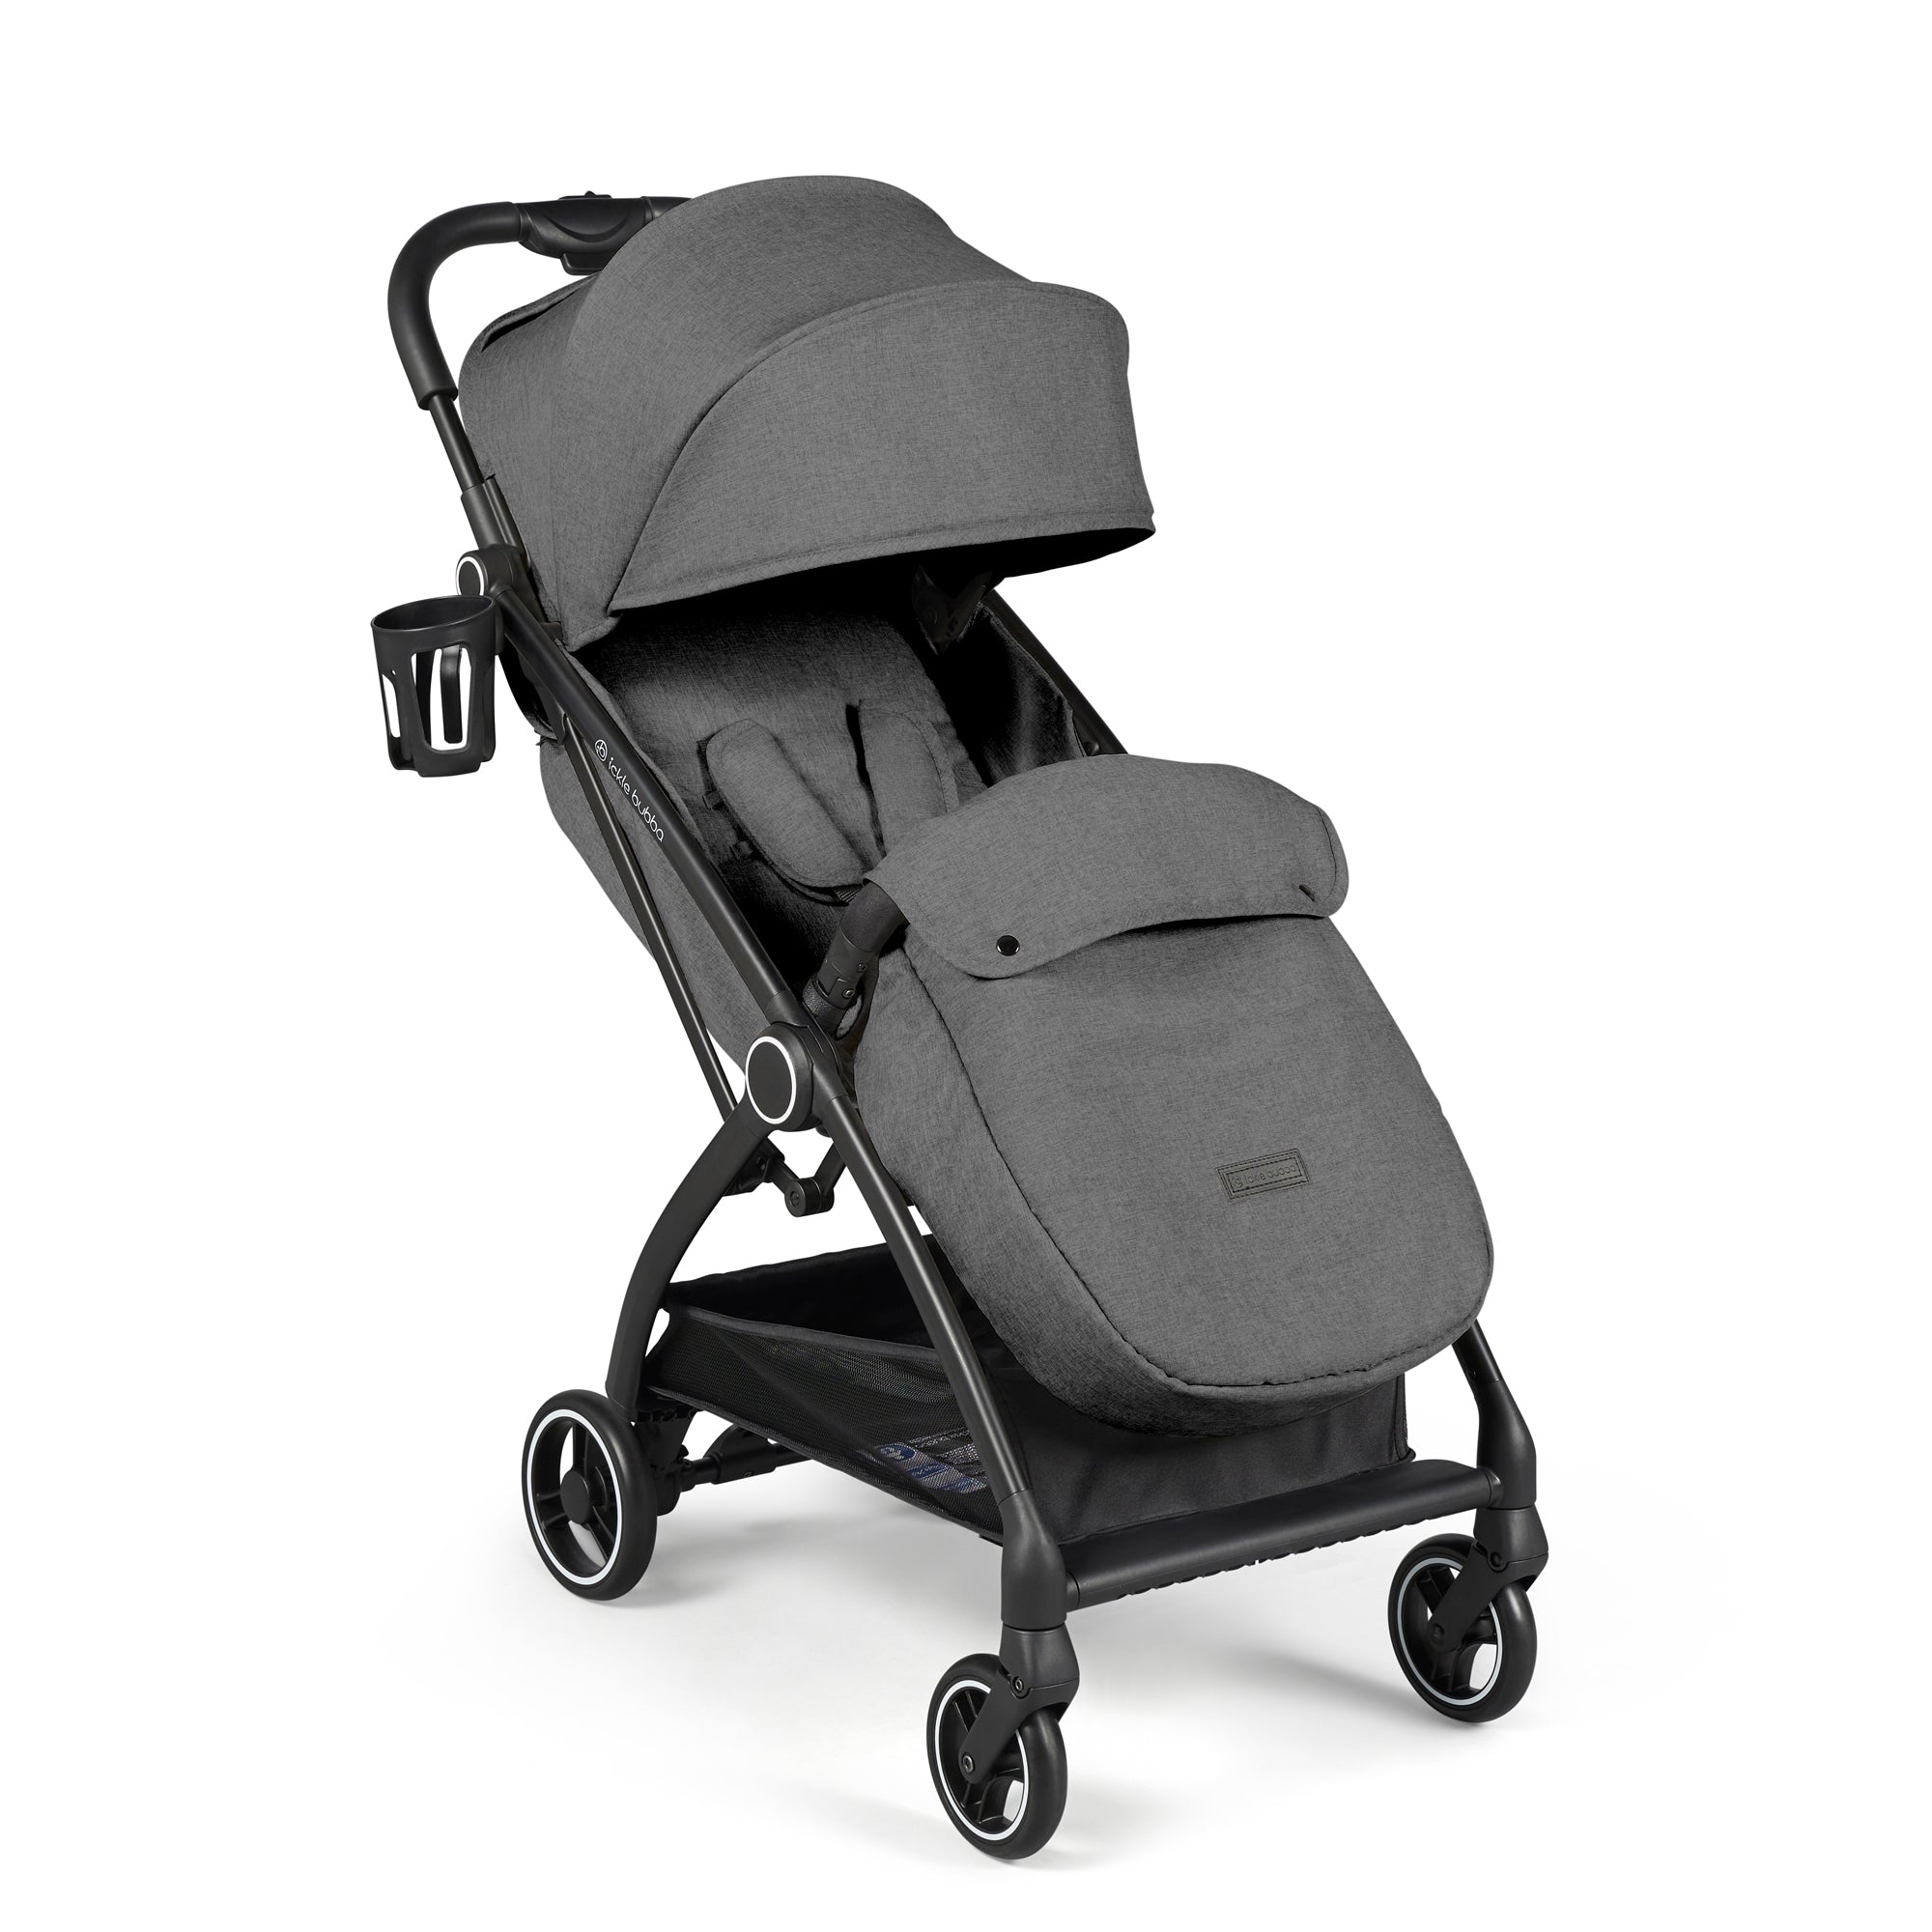 Ickle Bubba Stomp Luxe Stratus Travel System - Black/Charcoal Grey